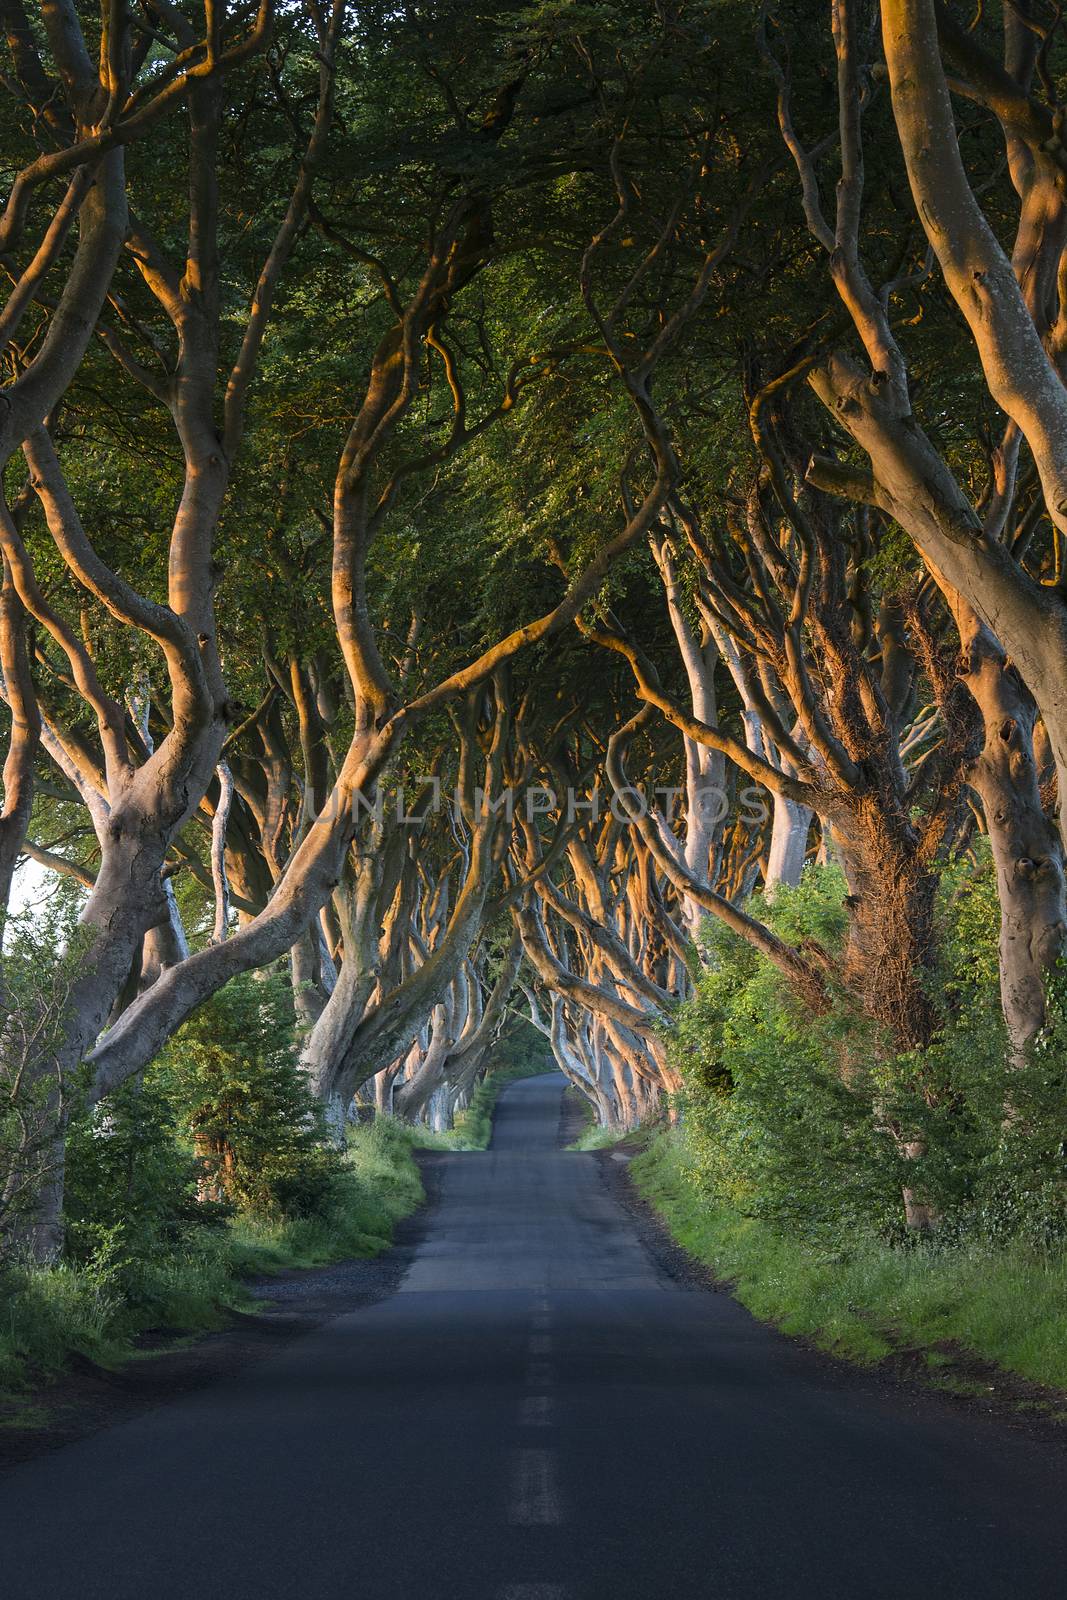 Early morning sunlight on the 'Dark Hedges' - an avenue of ancient trees in County Antrim in Northern Ireland.